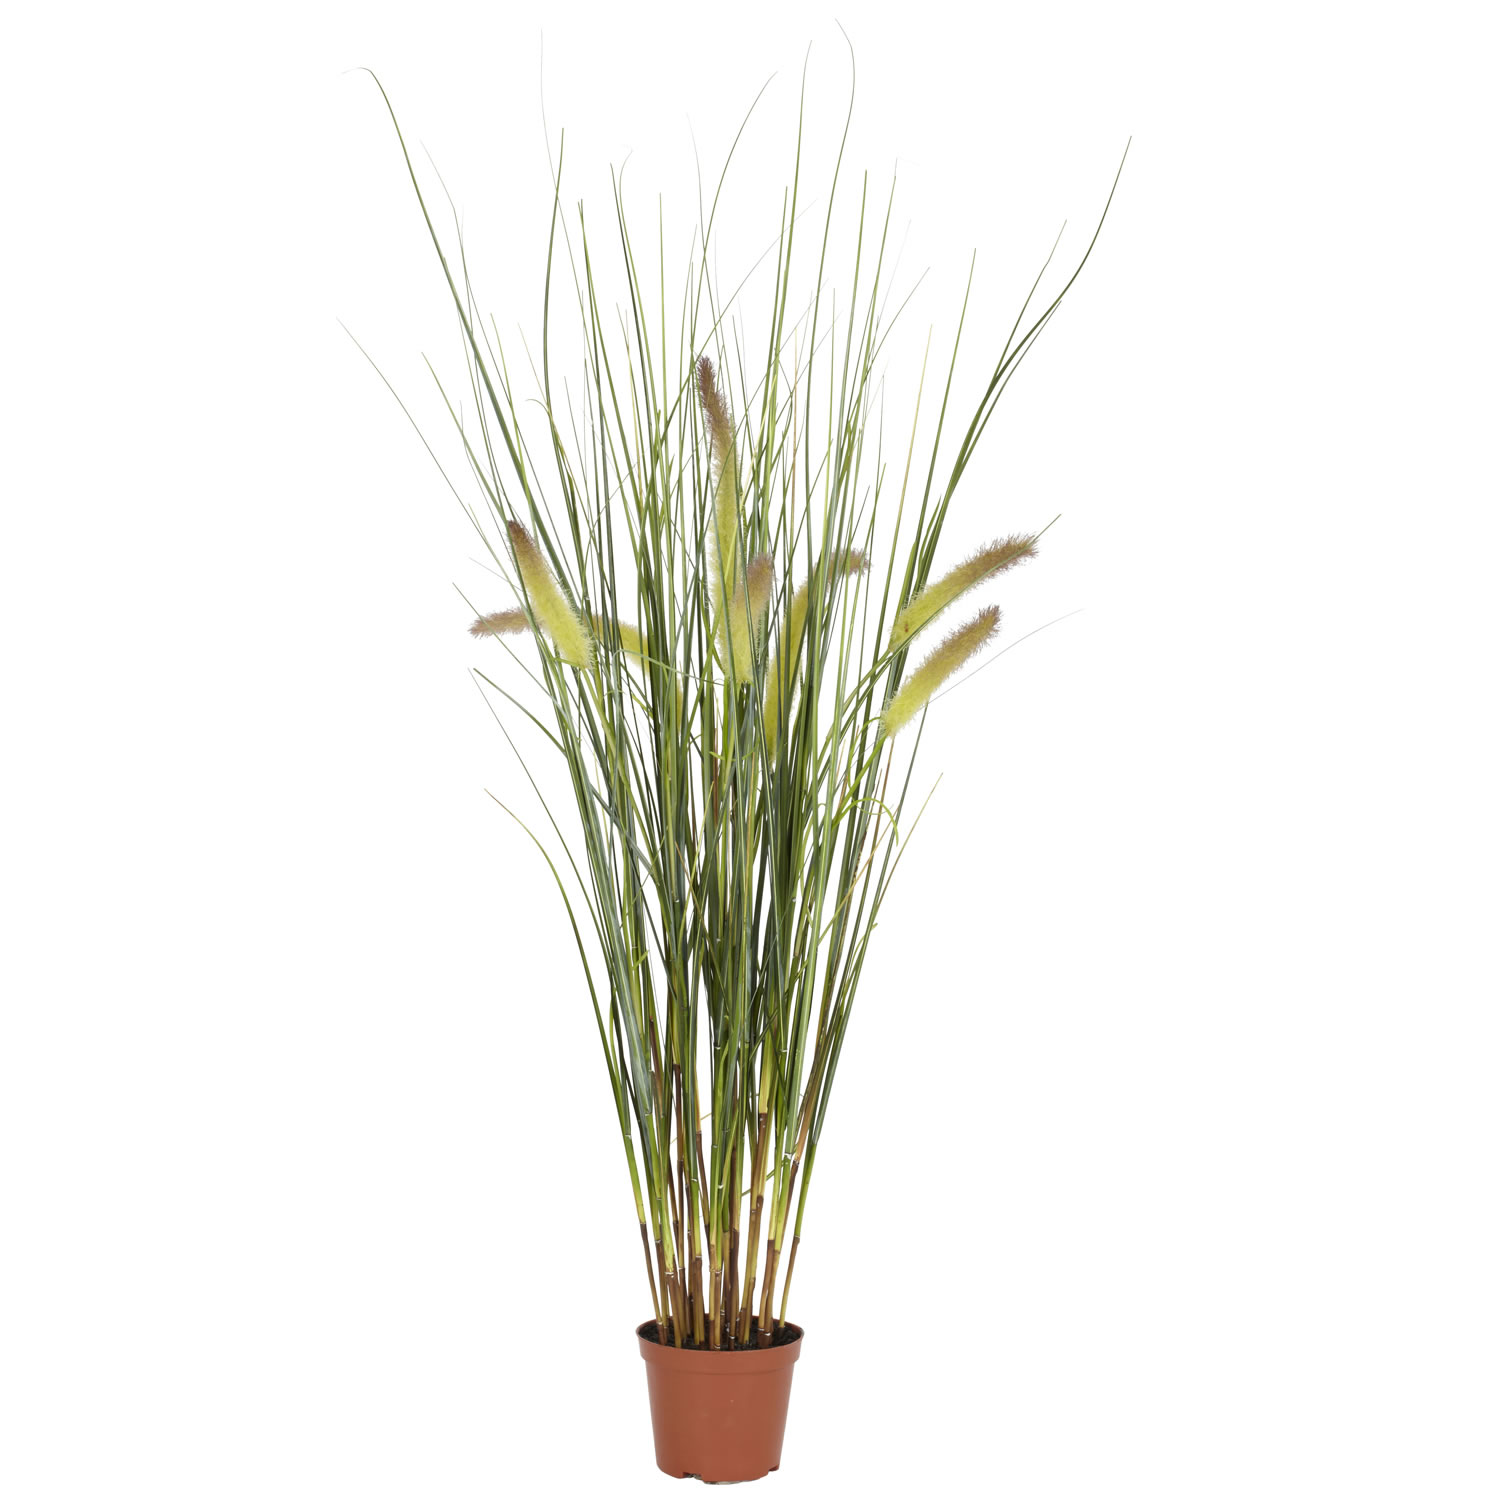 2.5 Foot Grass Plant: Potted